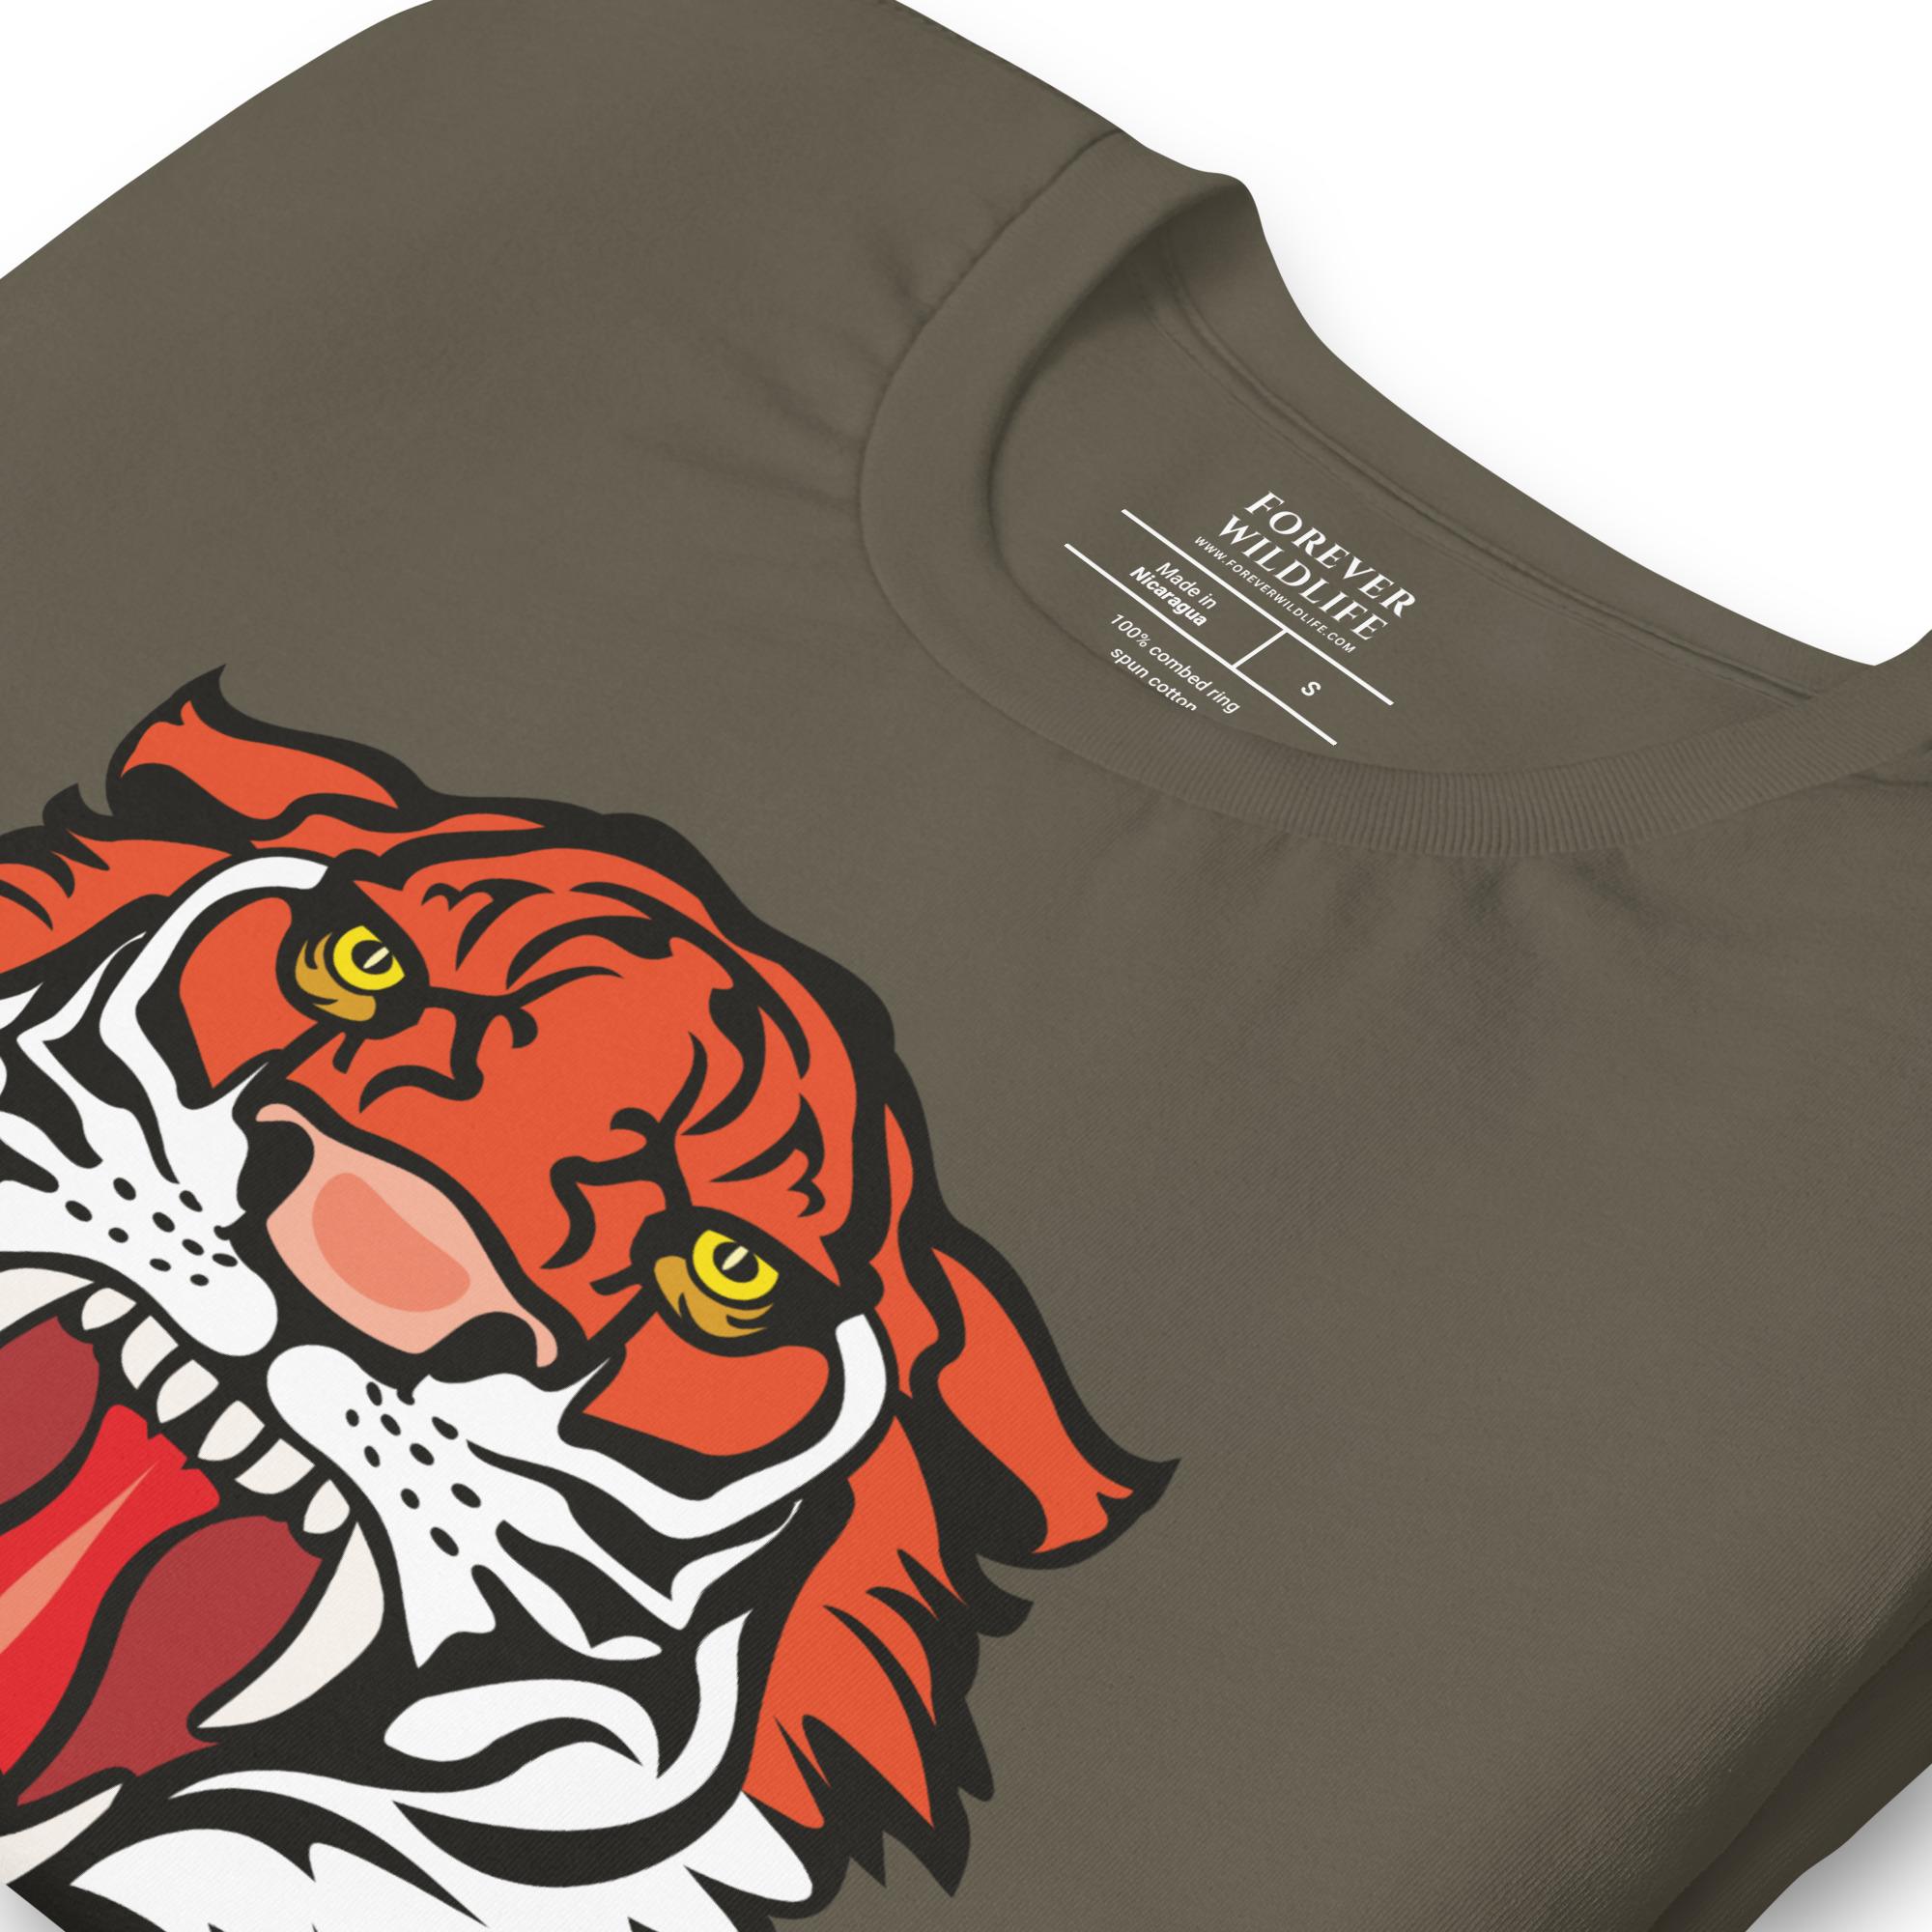 Tiger T-Shirt in Army – Premium Wildlife T-Shirt Design, Wildlife Clothing & Apparel from Forever Wildlife